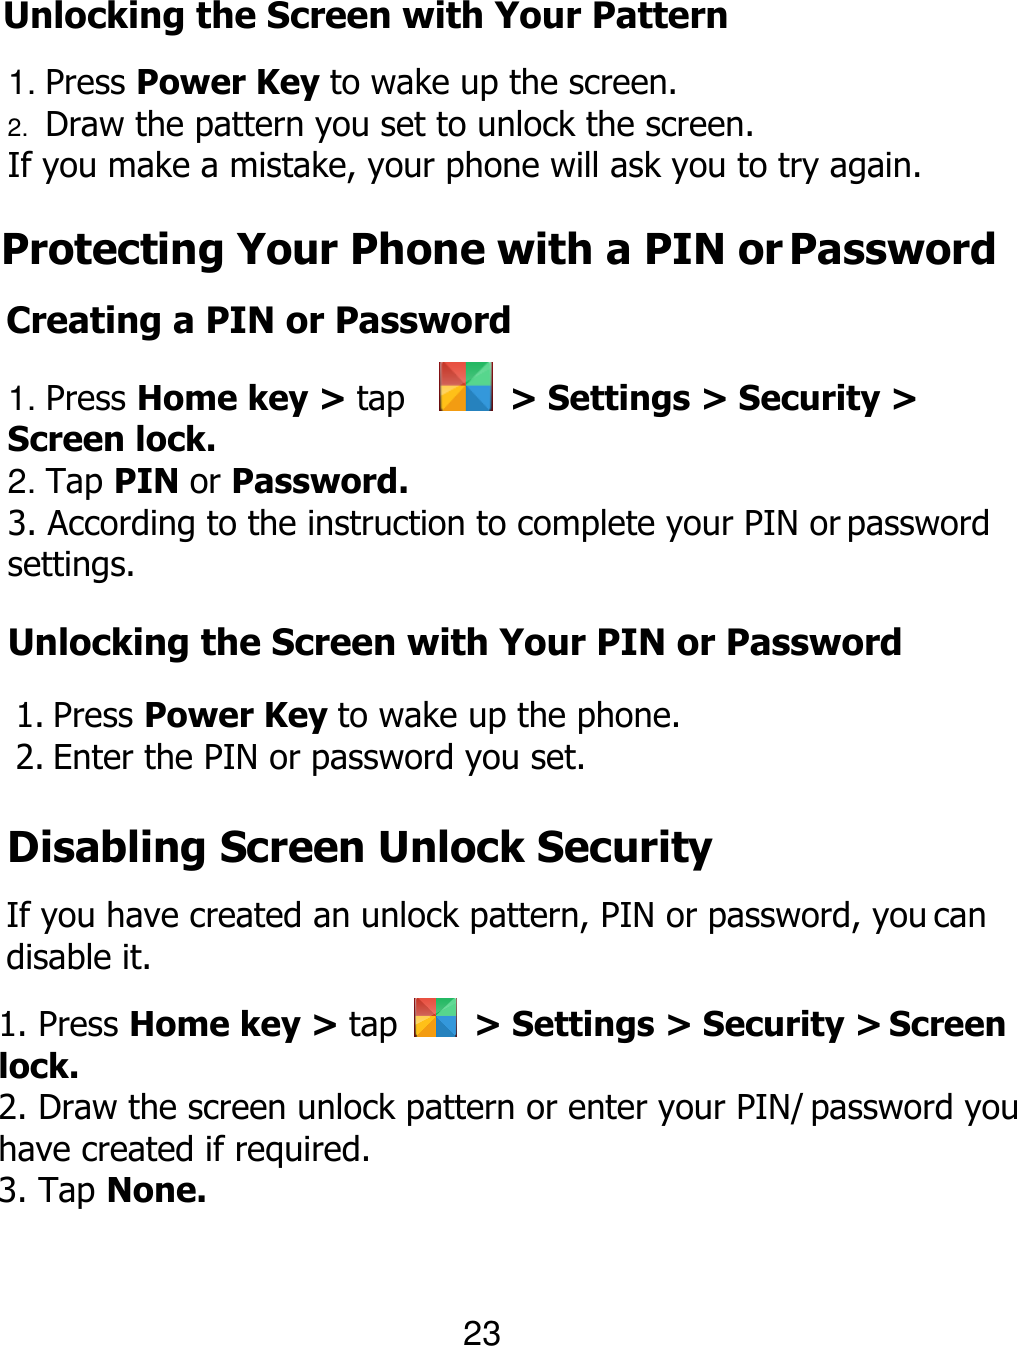  23 Unlocking the Screen with Your Pattern 1. Press Power Key to wake up the screen. 2. Draw the pattern you set to unlock the screen. If you make a mistake, your phone will ask you to try again. Protecting Your Phone with a PIN or Password Creating a PIN or Password 1. Press Home key &gt; tap      &gt; Settings &gt; Security &gt; Screen lock. 2. Tap PIN or Password. 3. According to the instruction to complete your PIN or password settings. Unlocking the Screen with Your PIN or Password 1. Press Power Key to wake up the phone. 2. Enter the PIN or password you set. Disabling Screen Unlock Security If you have created an unlock pattern, PIN or password, you can disable it. 1. Press Home key &gt; tap    &gt; Settings &gt; Security &gt; Screen lock. 2. Draw the screen unlock pattern or enter your PIN/ password you have created if required. 3. Tap None. 